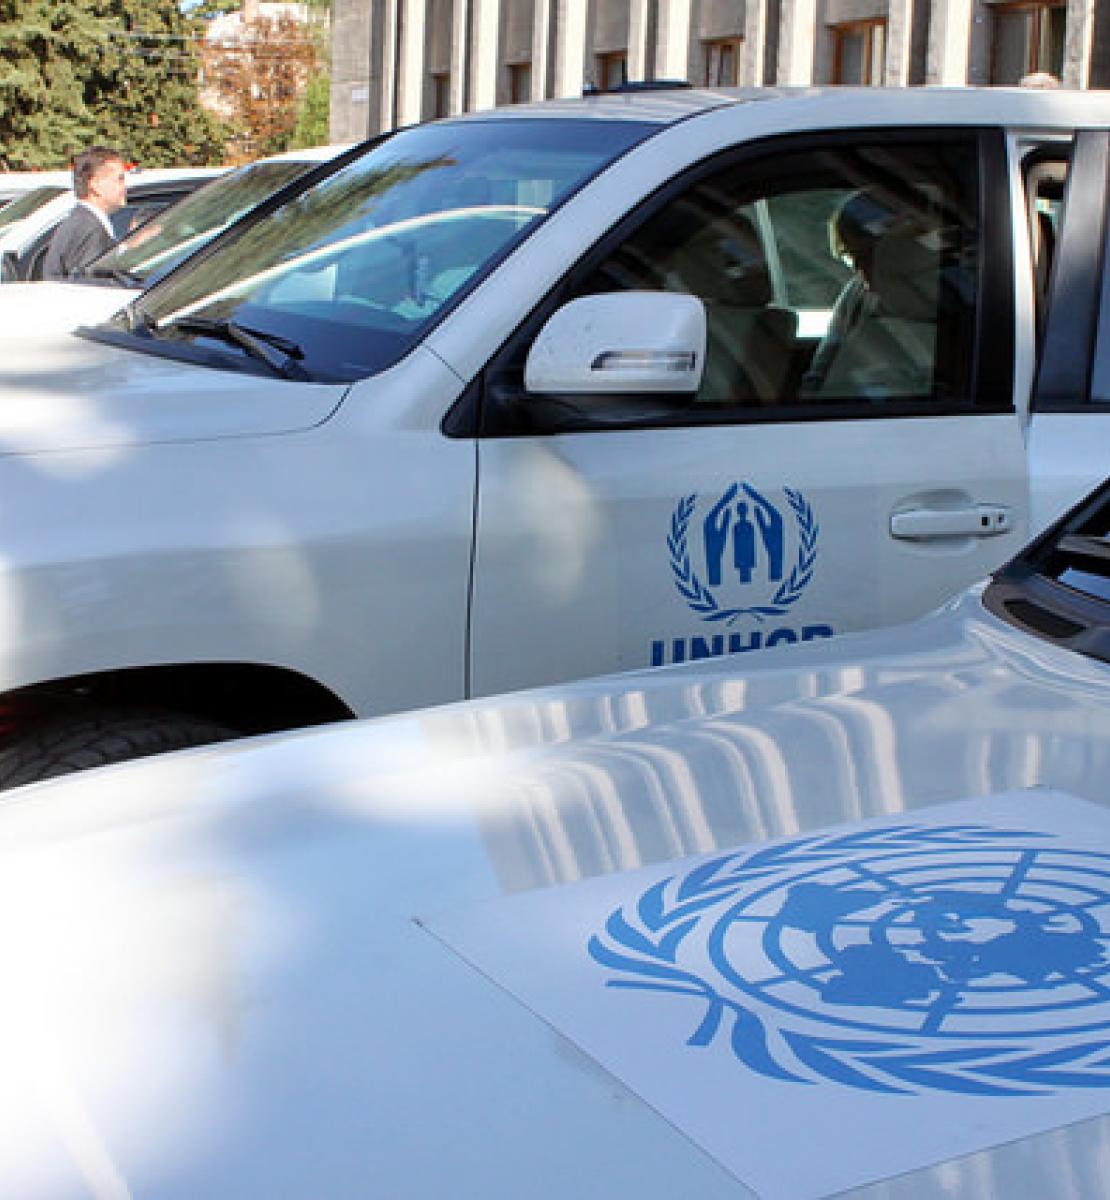 Car sharing at the United Nations in Laos? There’s an app for that